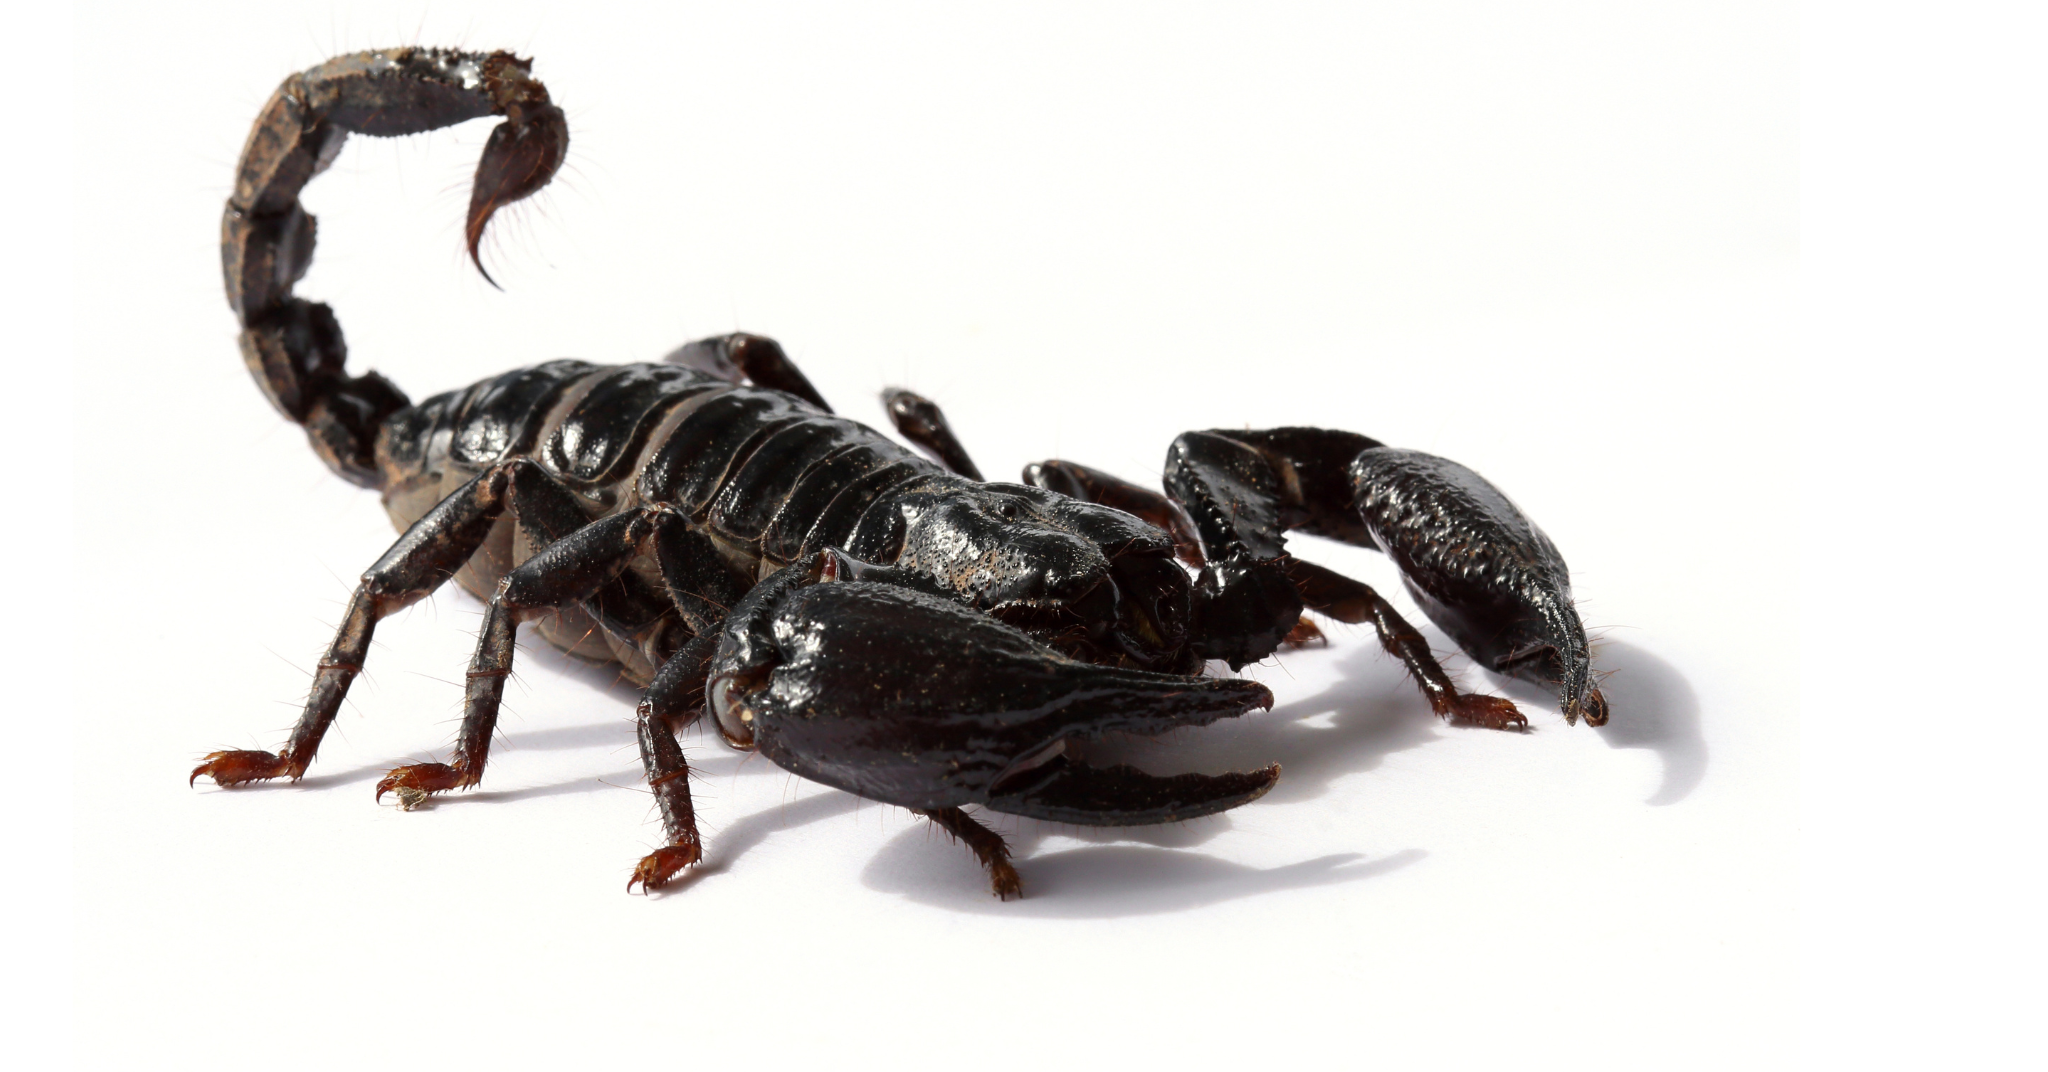 What Is a Black Scorpion?